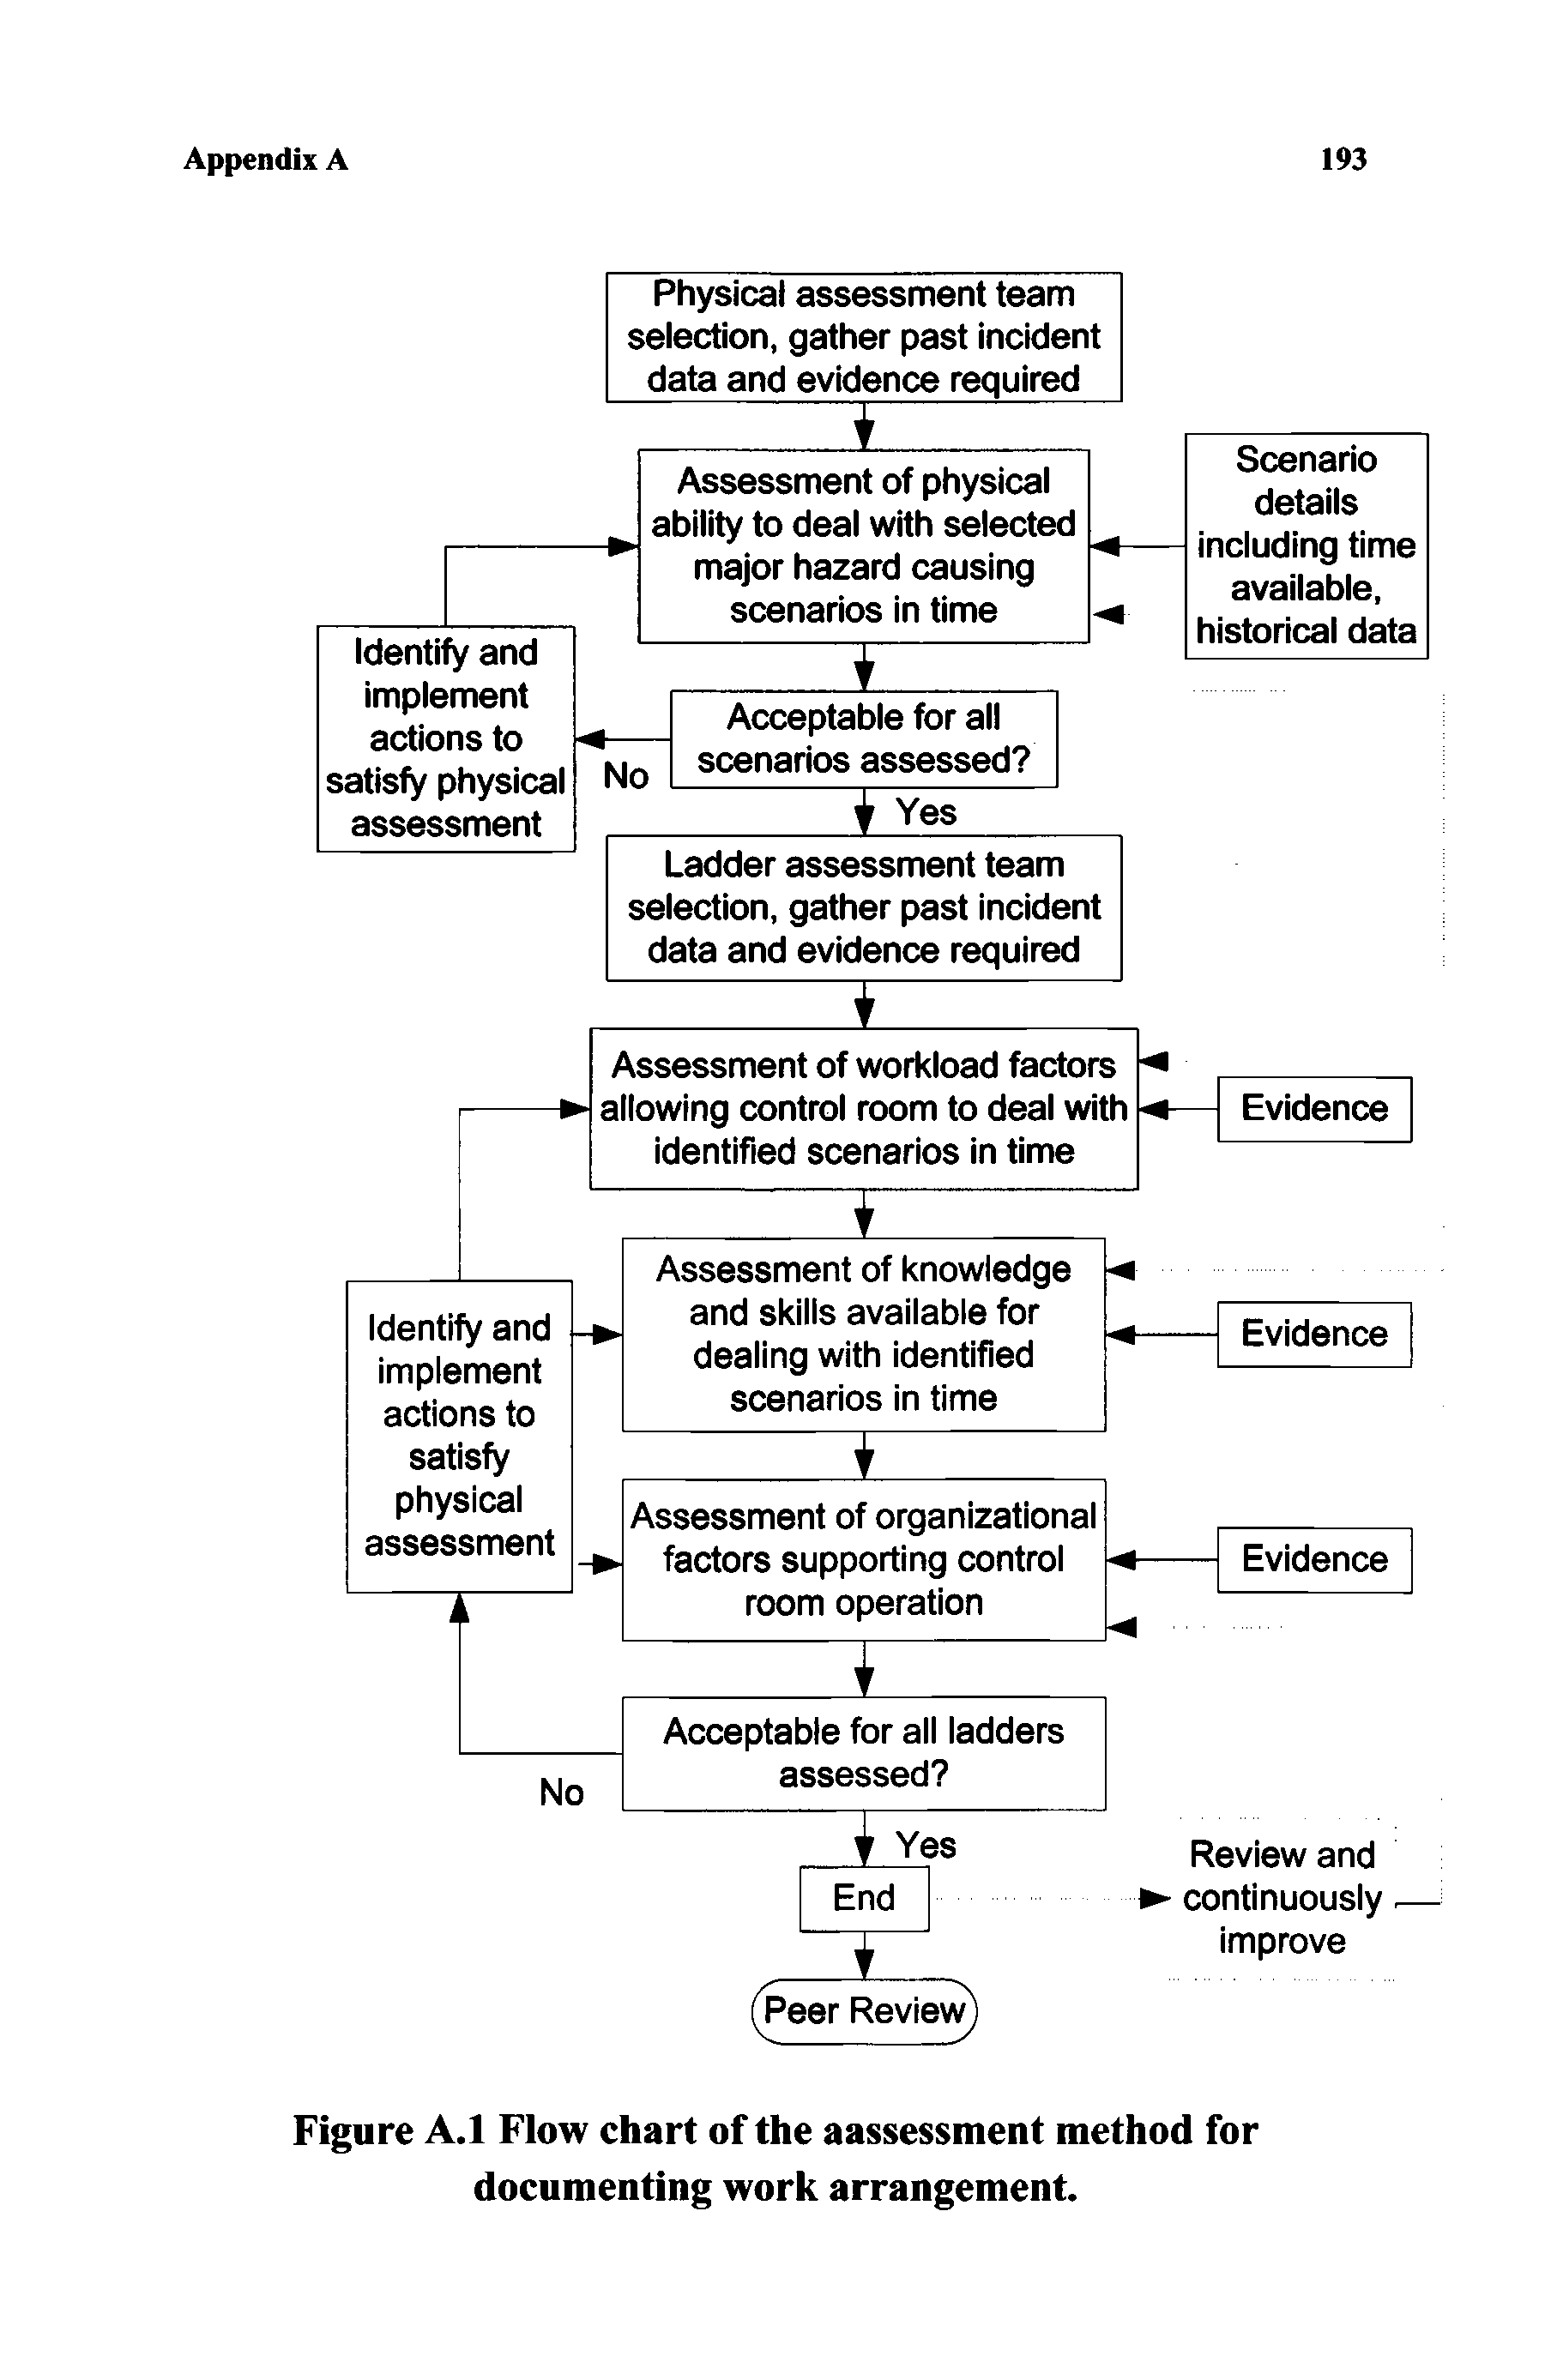 Figure A.1 Flow chart of the aassessment method for documenting work arrangement.